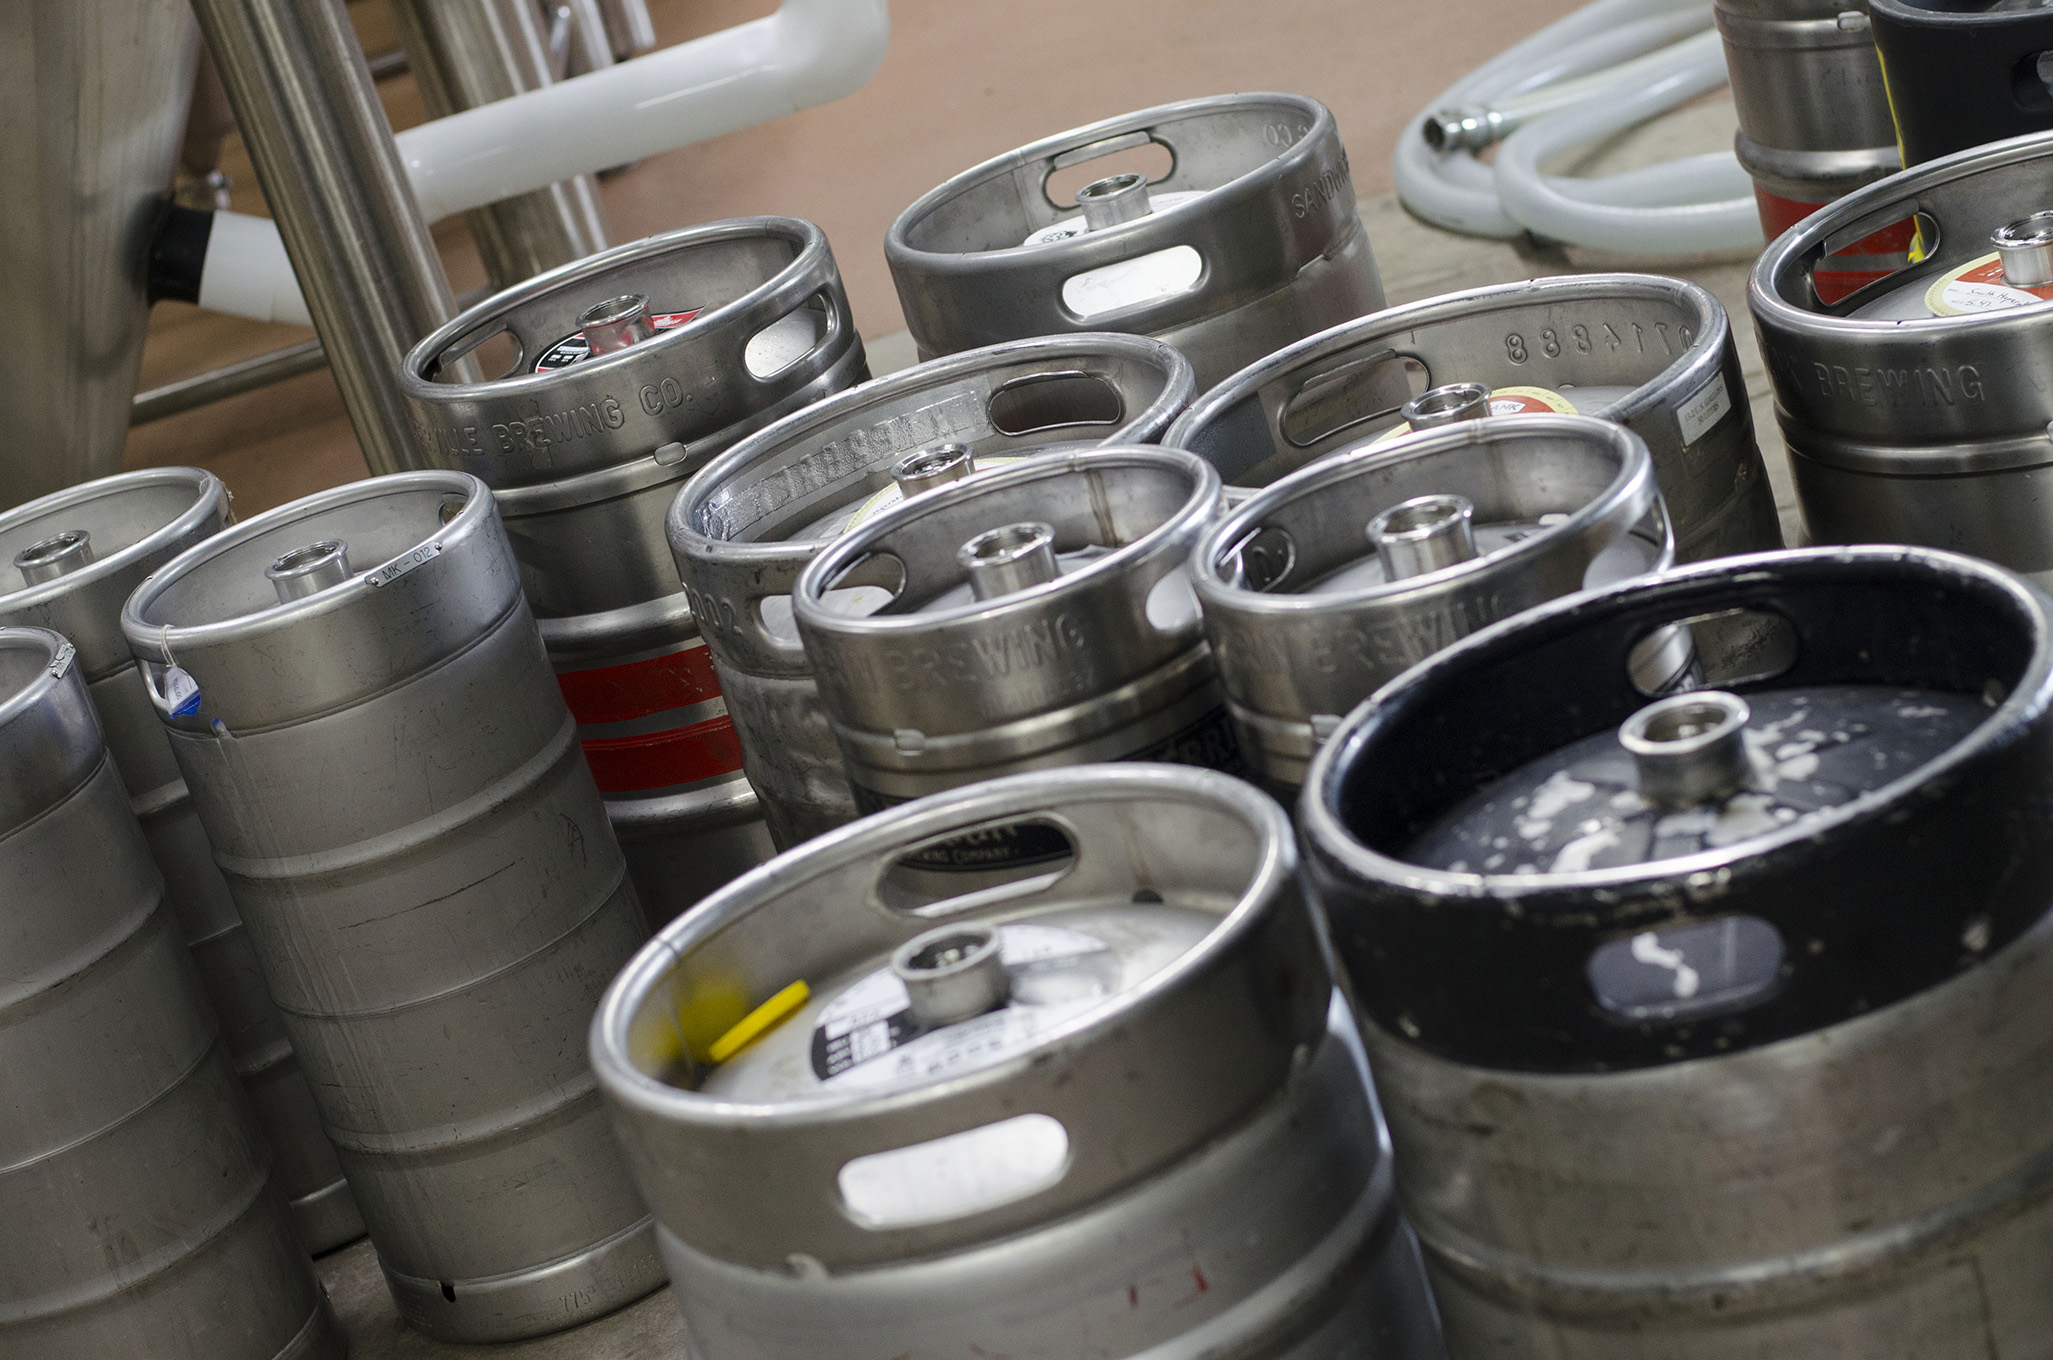 Kegs ready to be filled up with the 519 Collab created collaboratively by ten Windsor-Essex breweries.